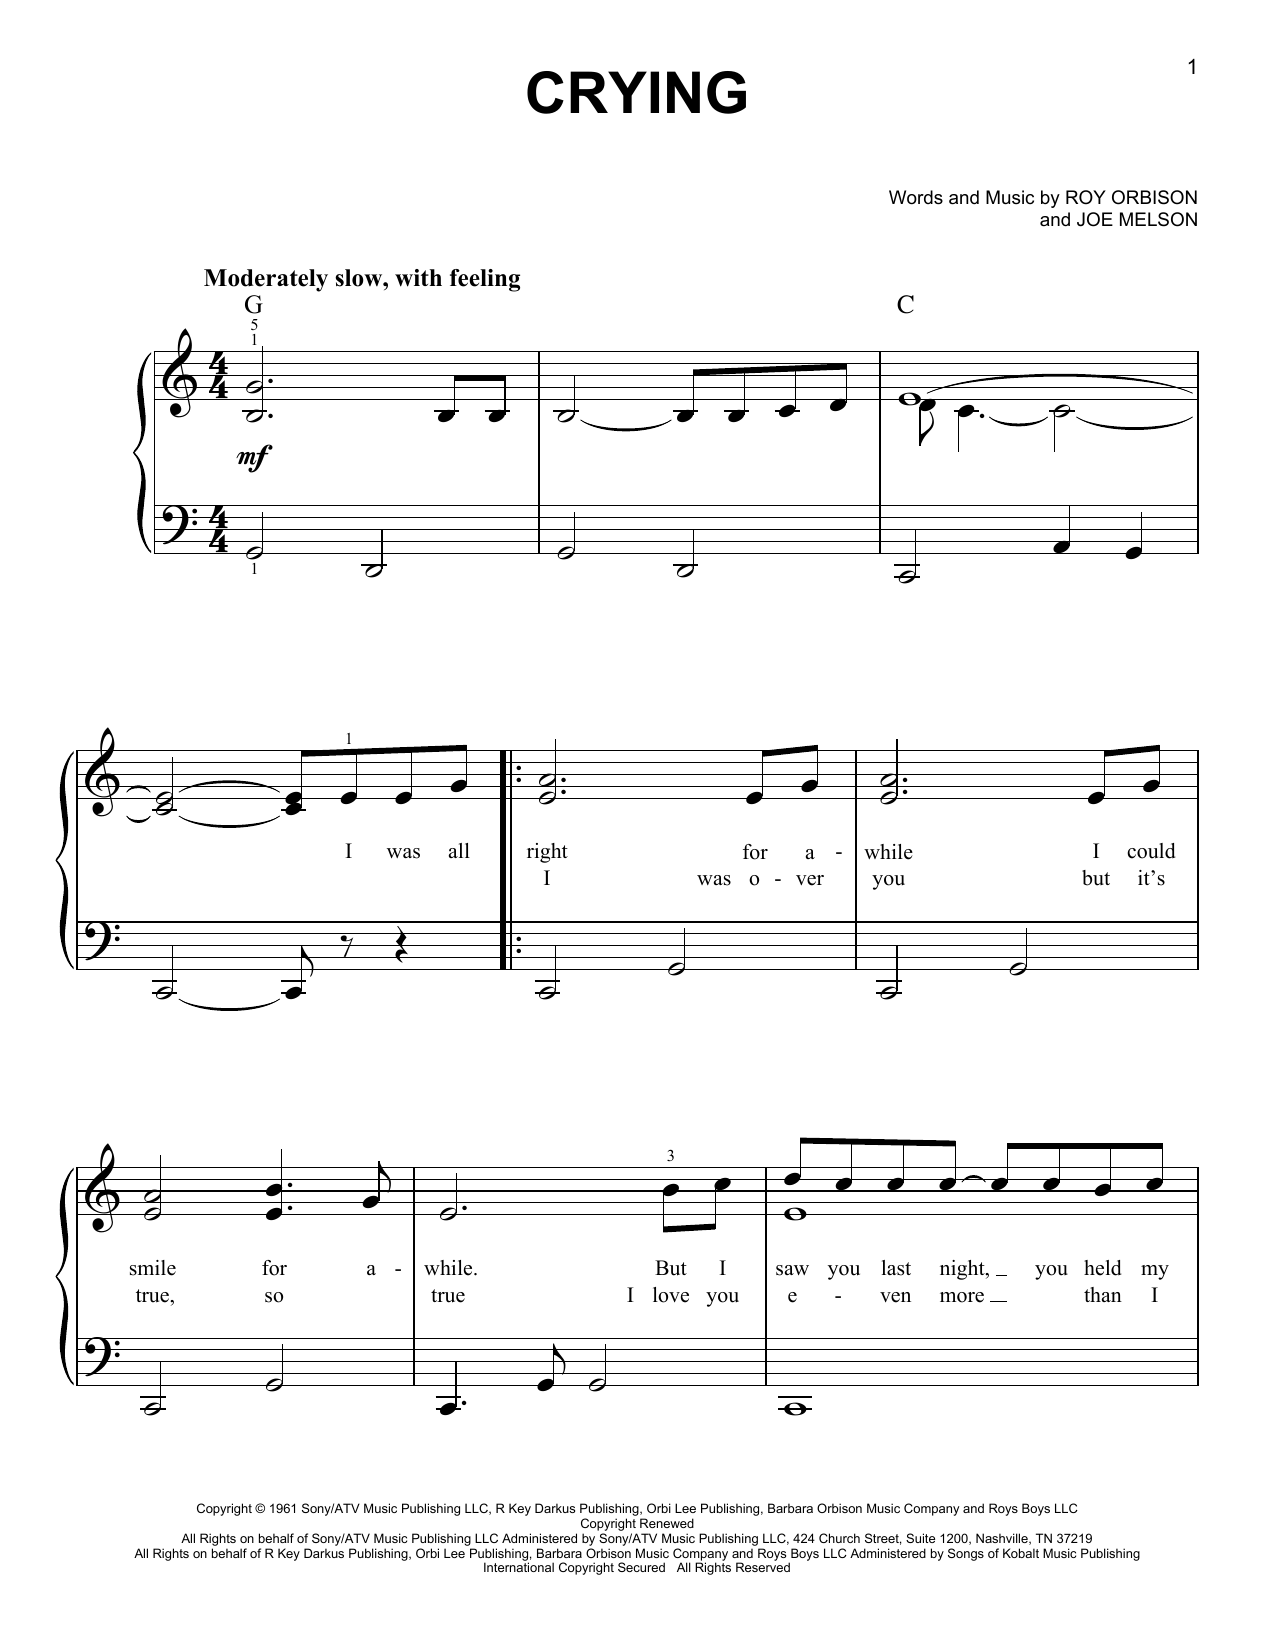 Roy Orbison Crying sheet music notes and chords. Download Printable PDF.